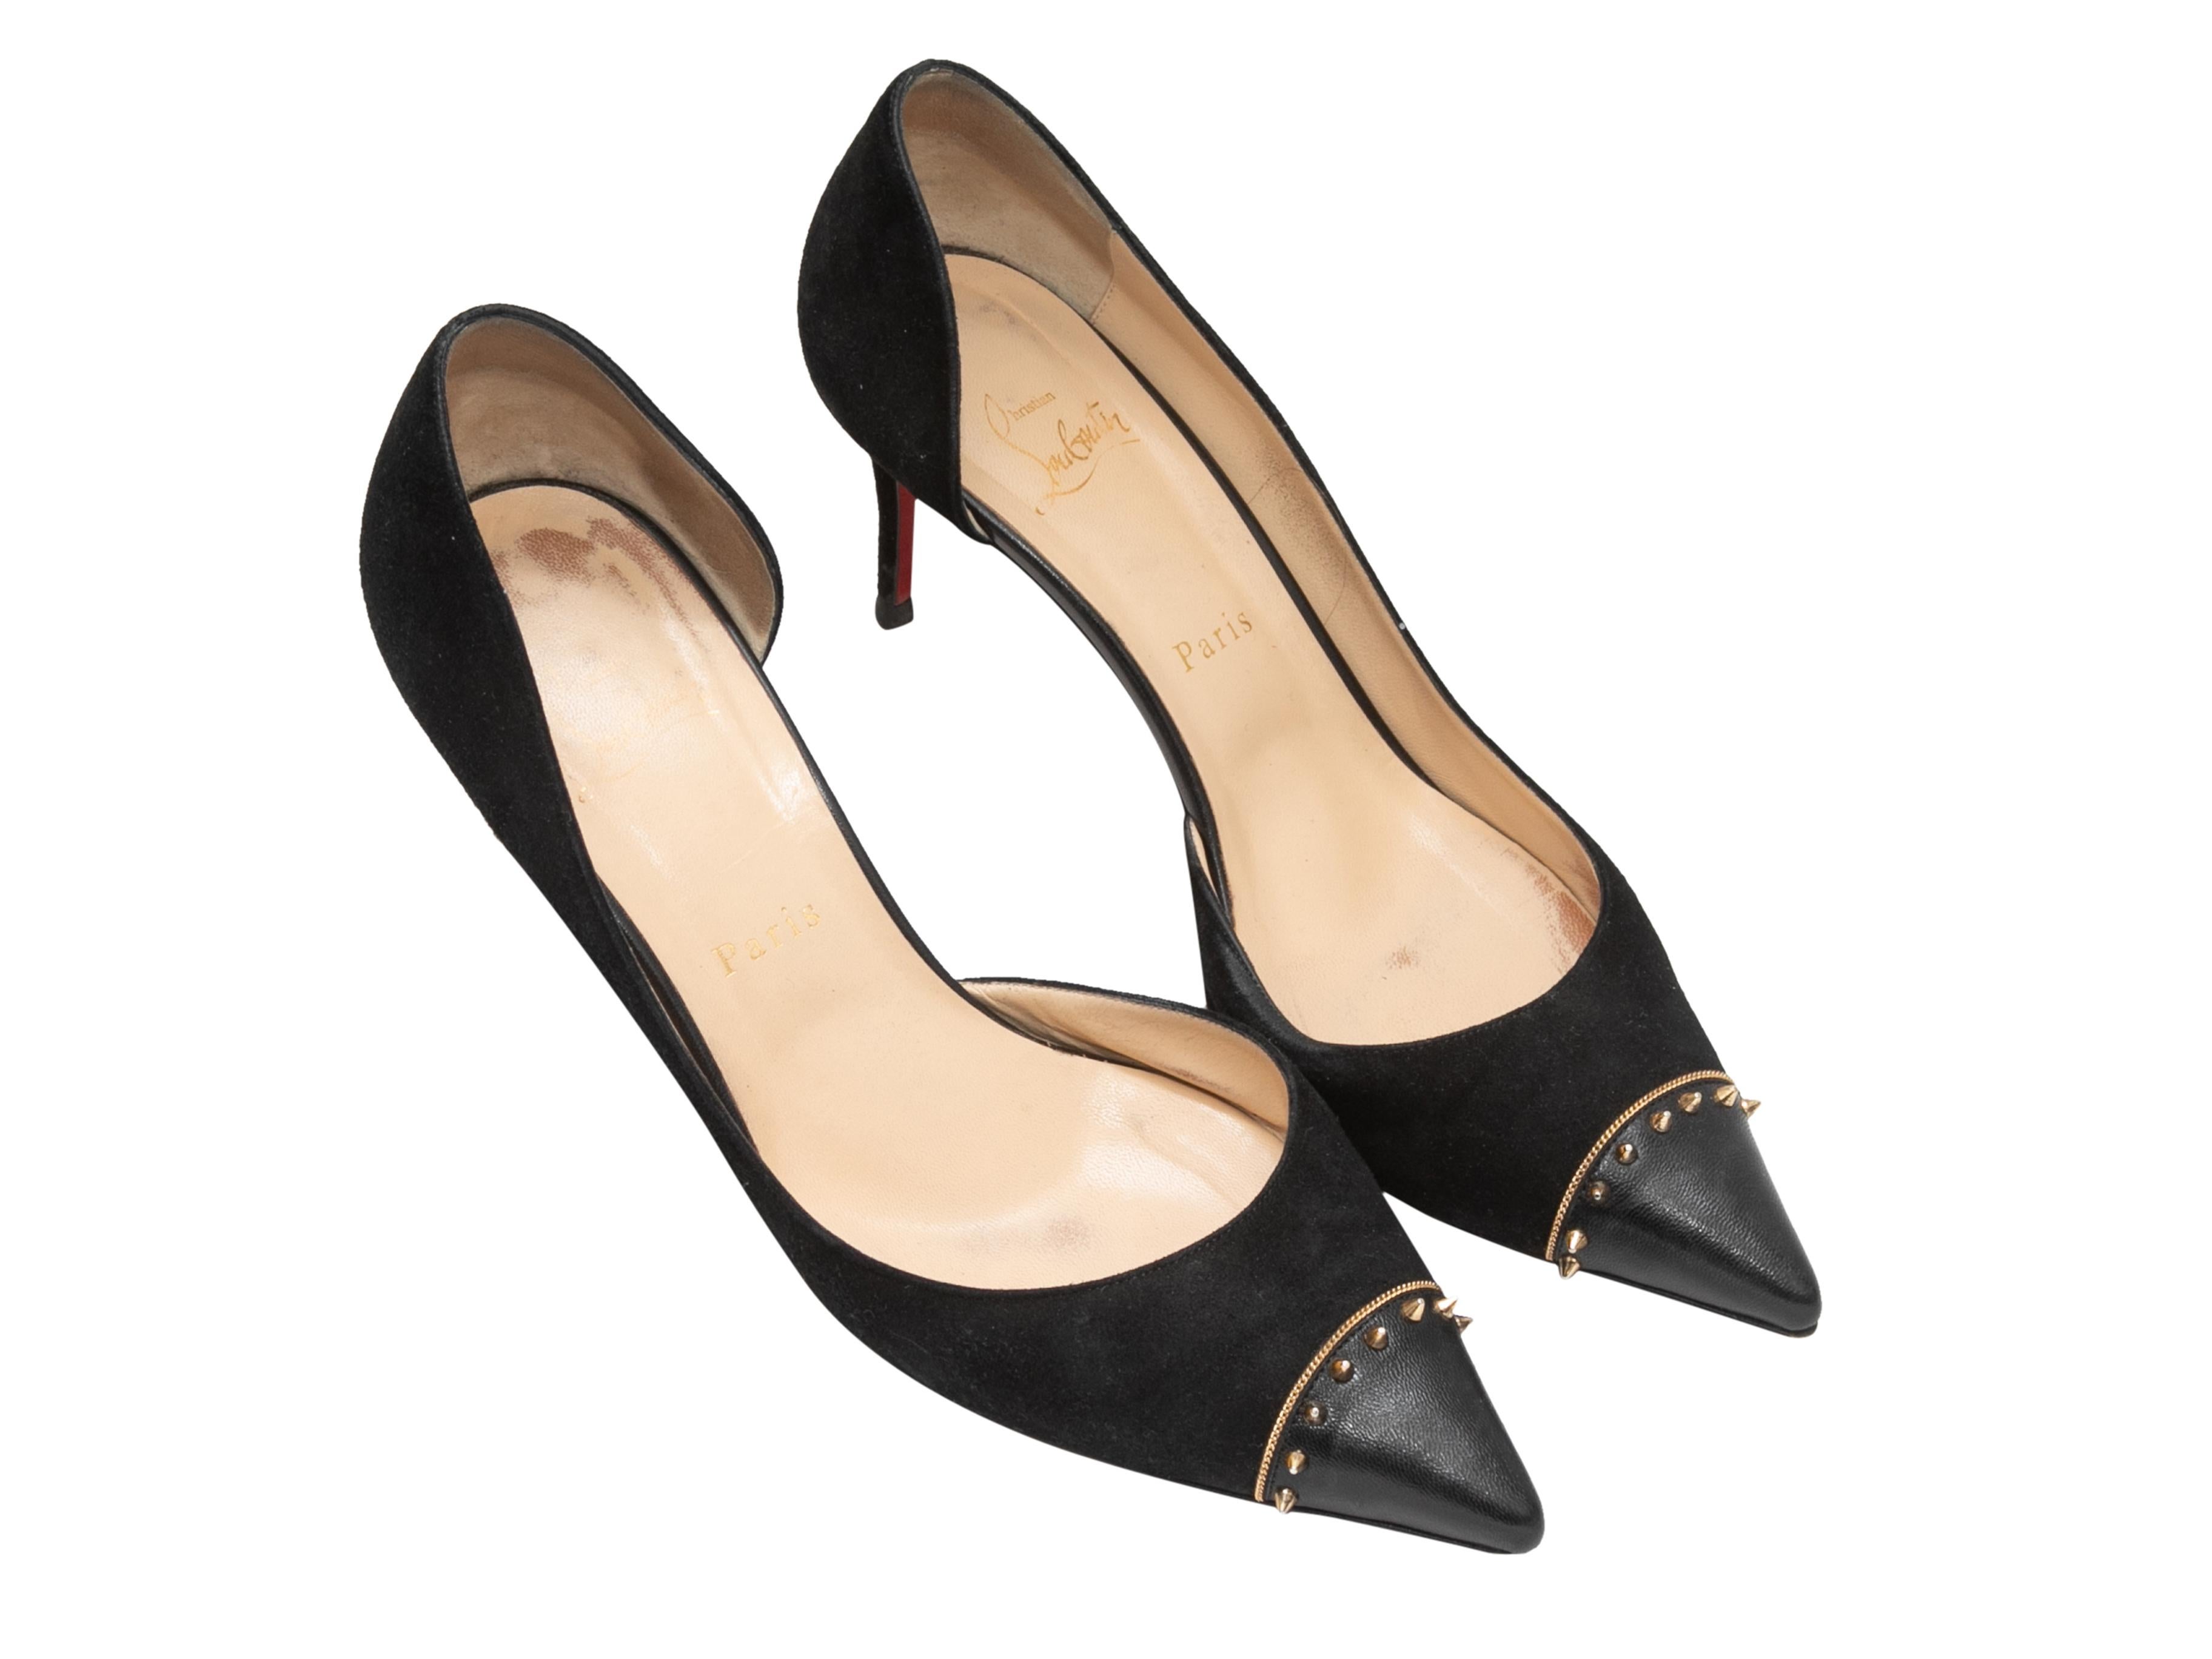 Black Christian Louboutin Suede Studded Pumps Size 39.5 In Good Condition For Sale In New York, NY